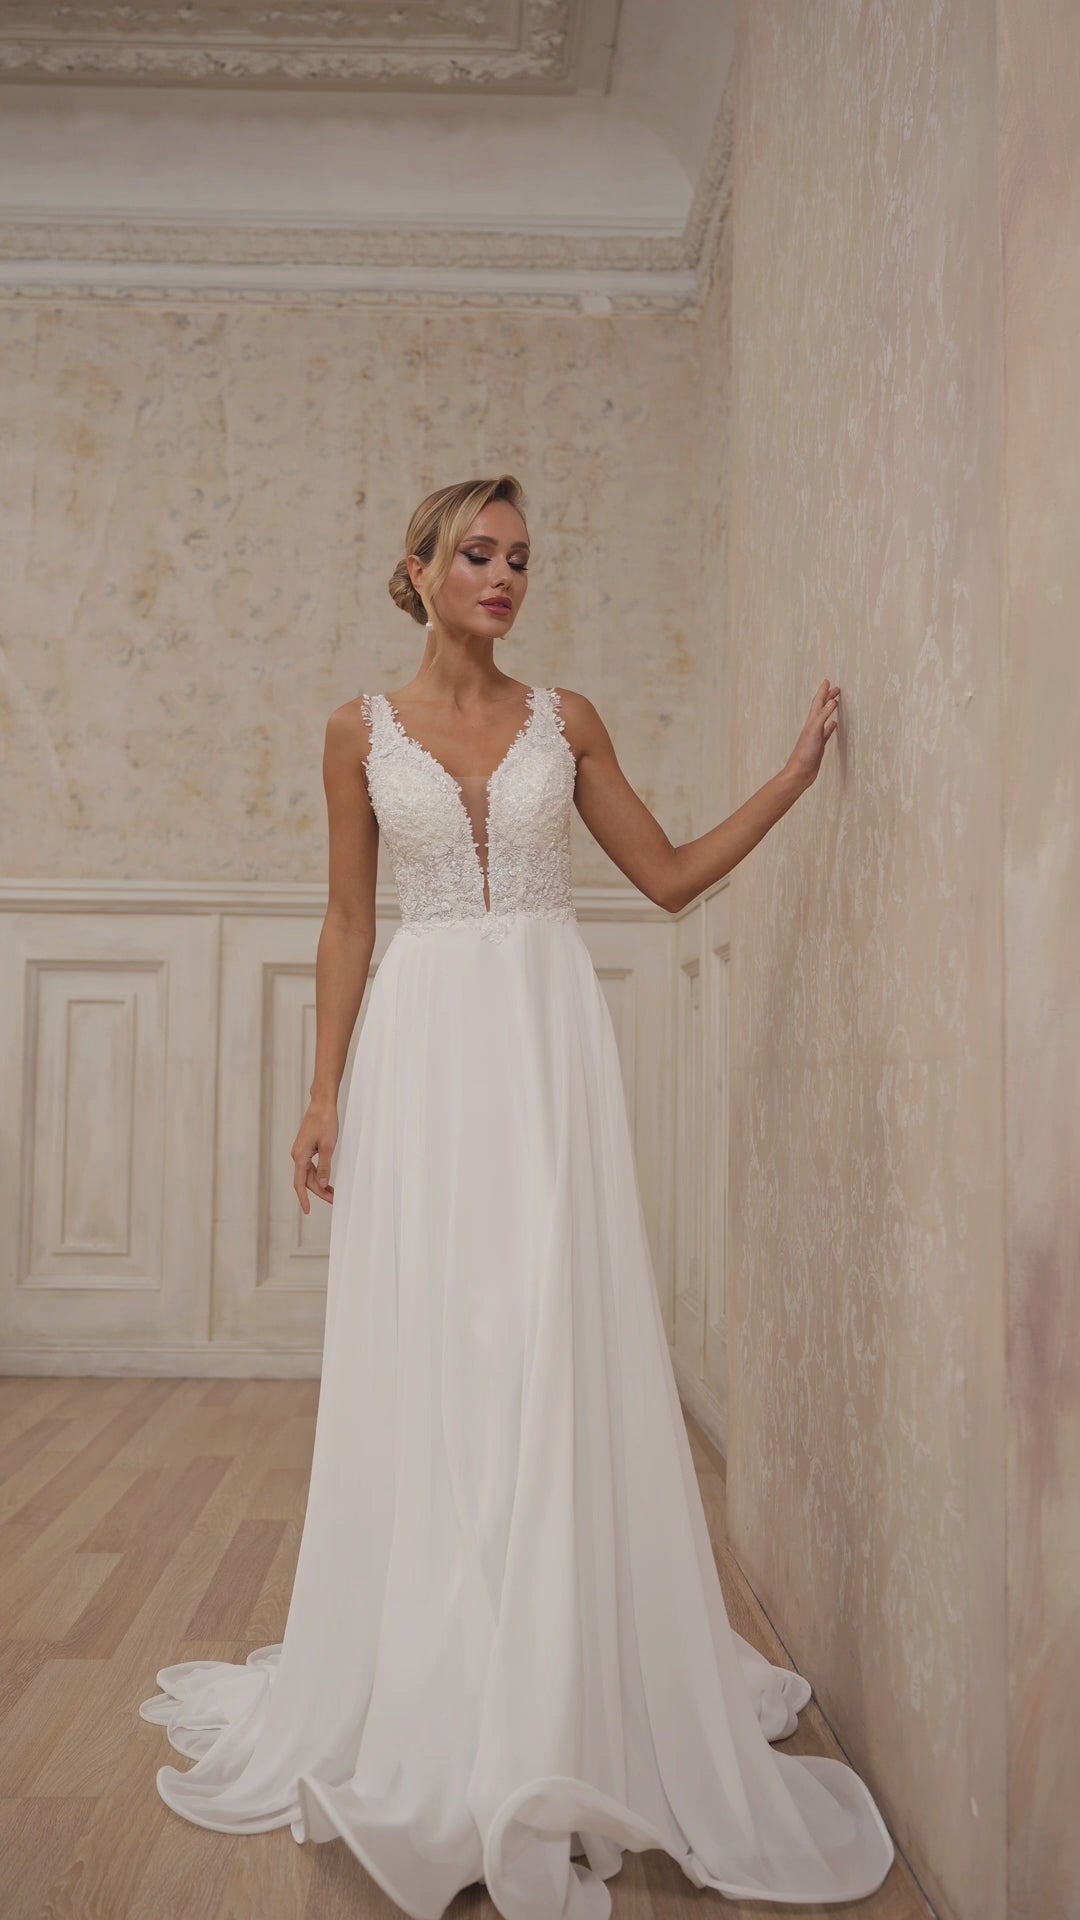 Sophisticated Floral Lace V-Neck Wedding Dress | Timeless A-Line Bridal Gown with Train Plus Size